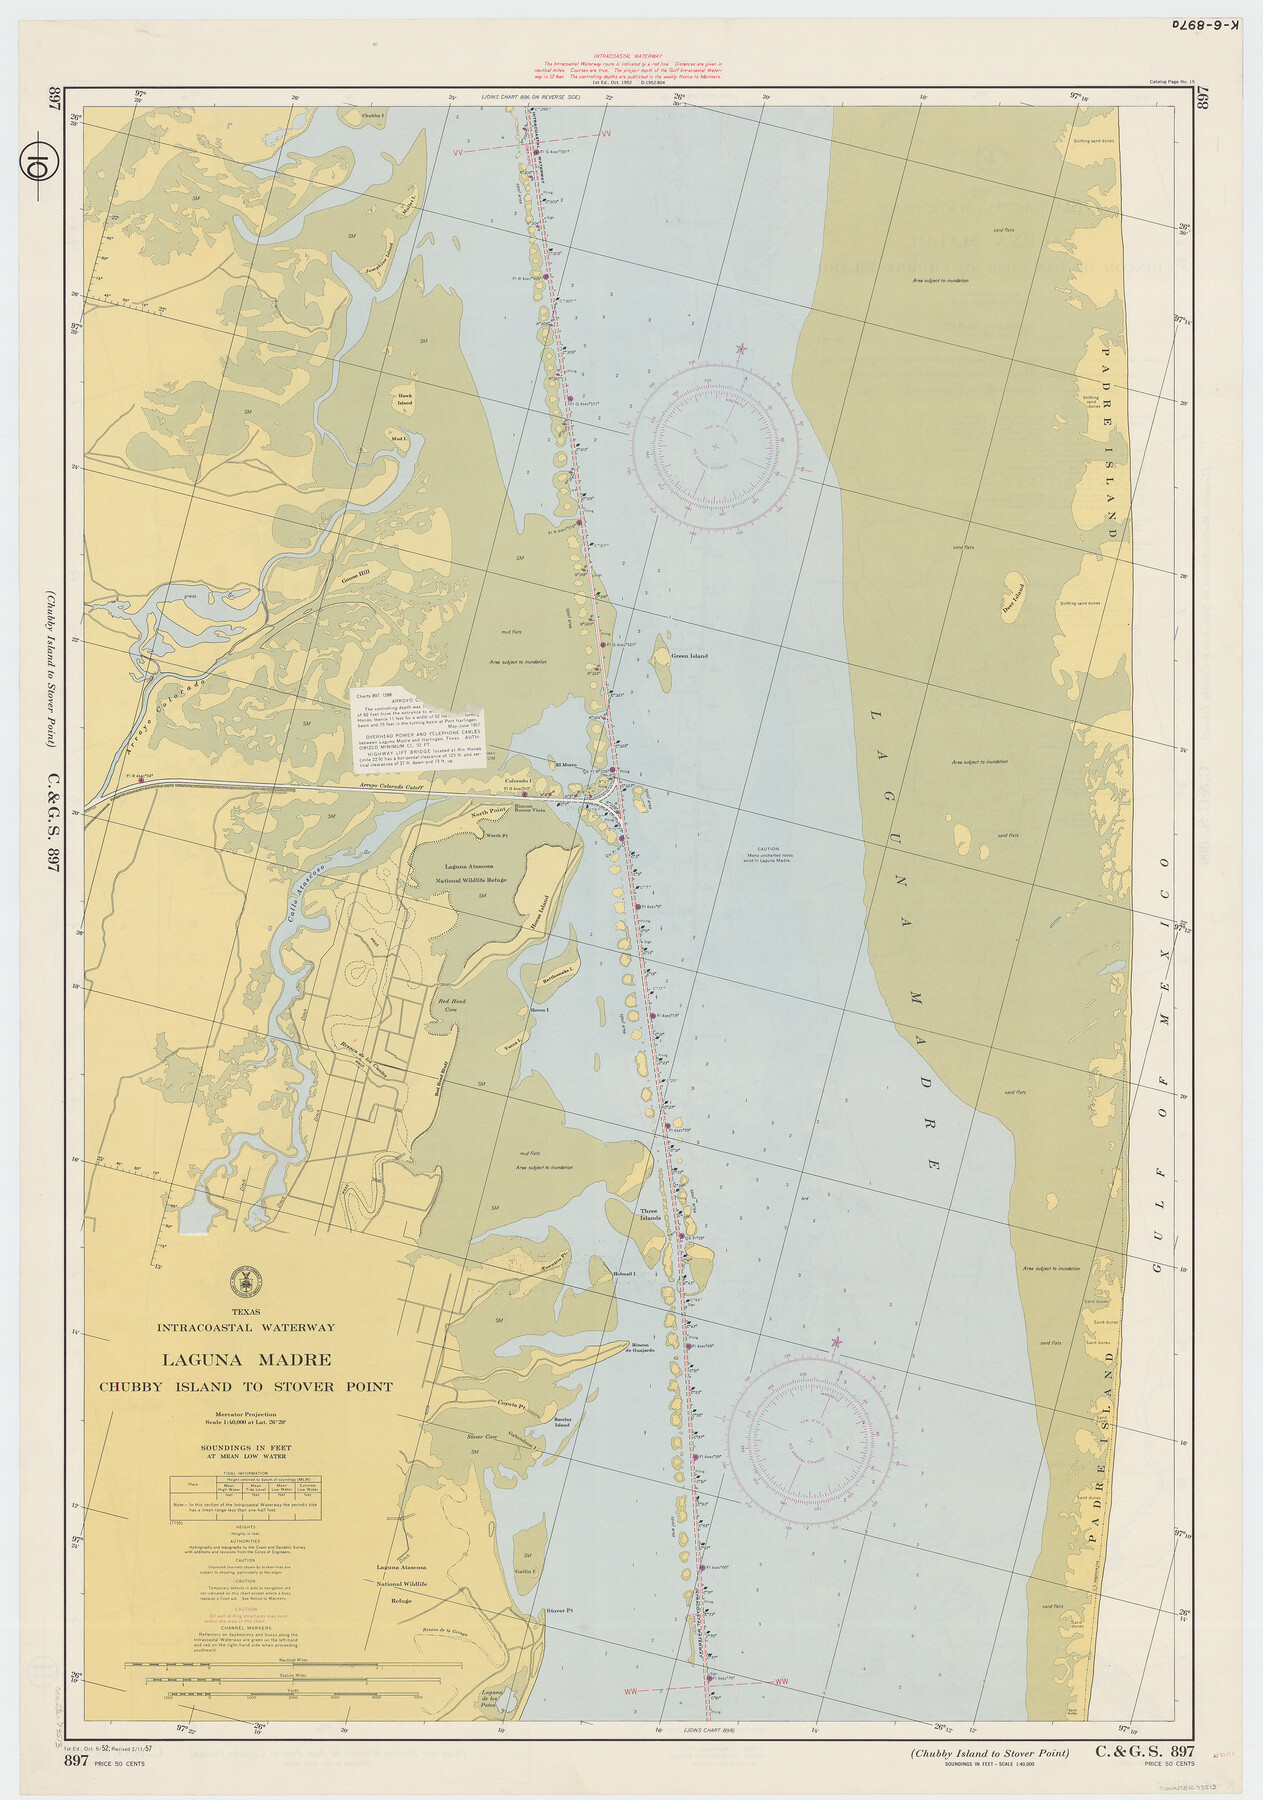 73513, Texas Intracoastal Waterway - Laguna Madre - Rincon de San Jose to Chubby Island, General Map Collection